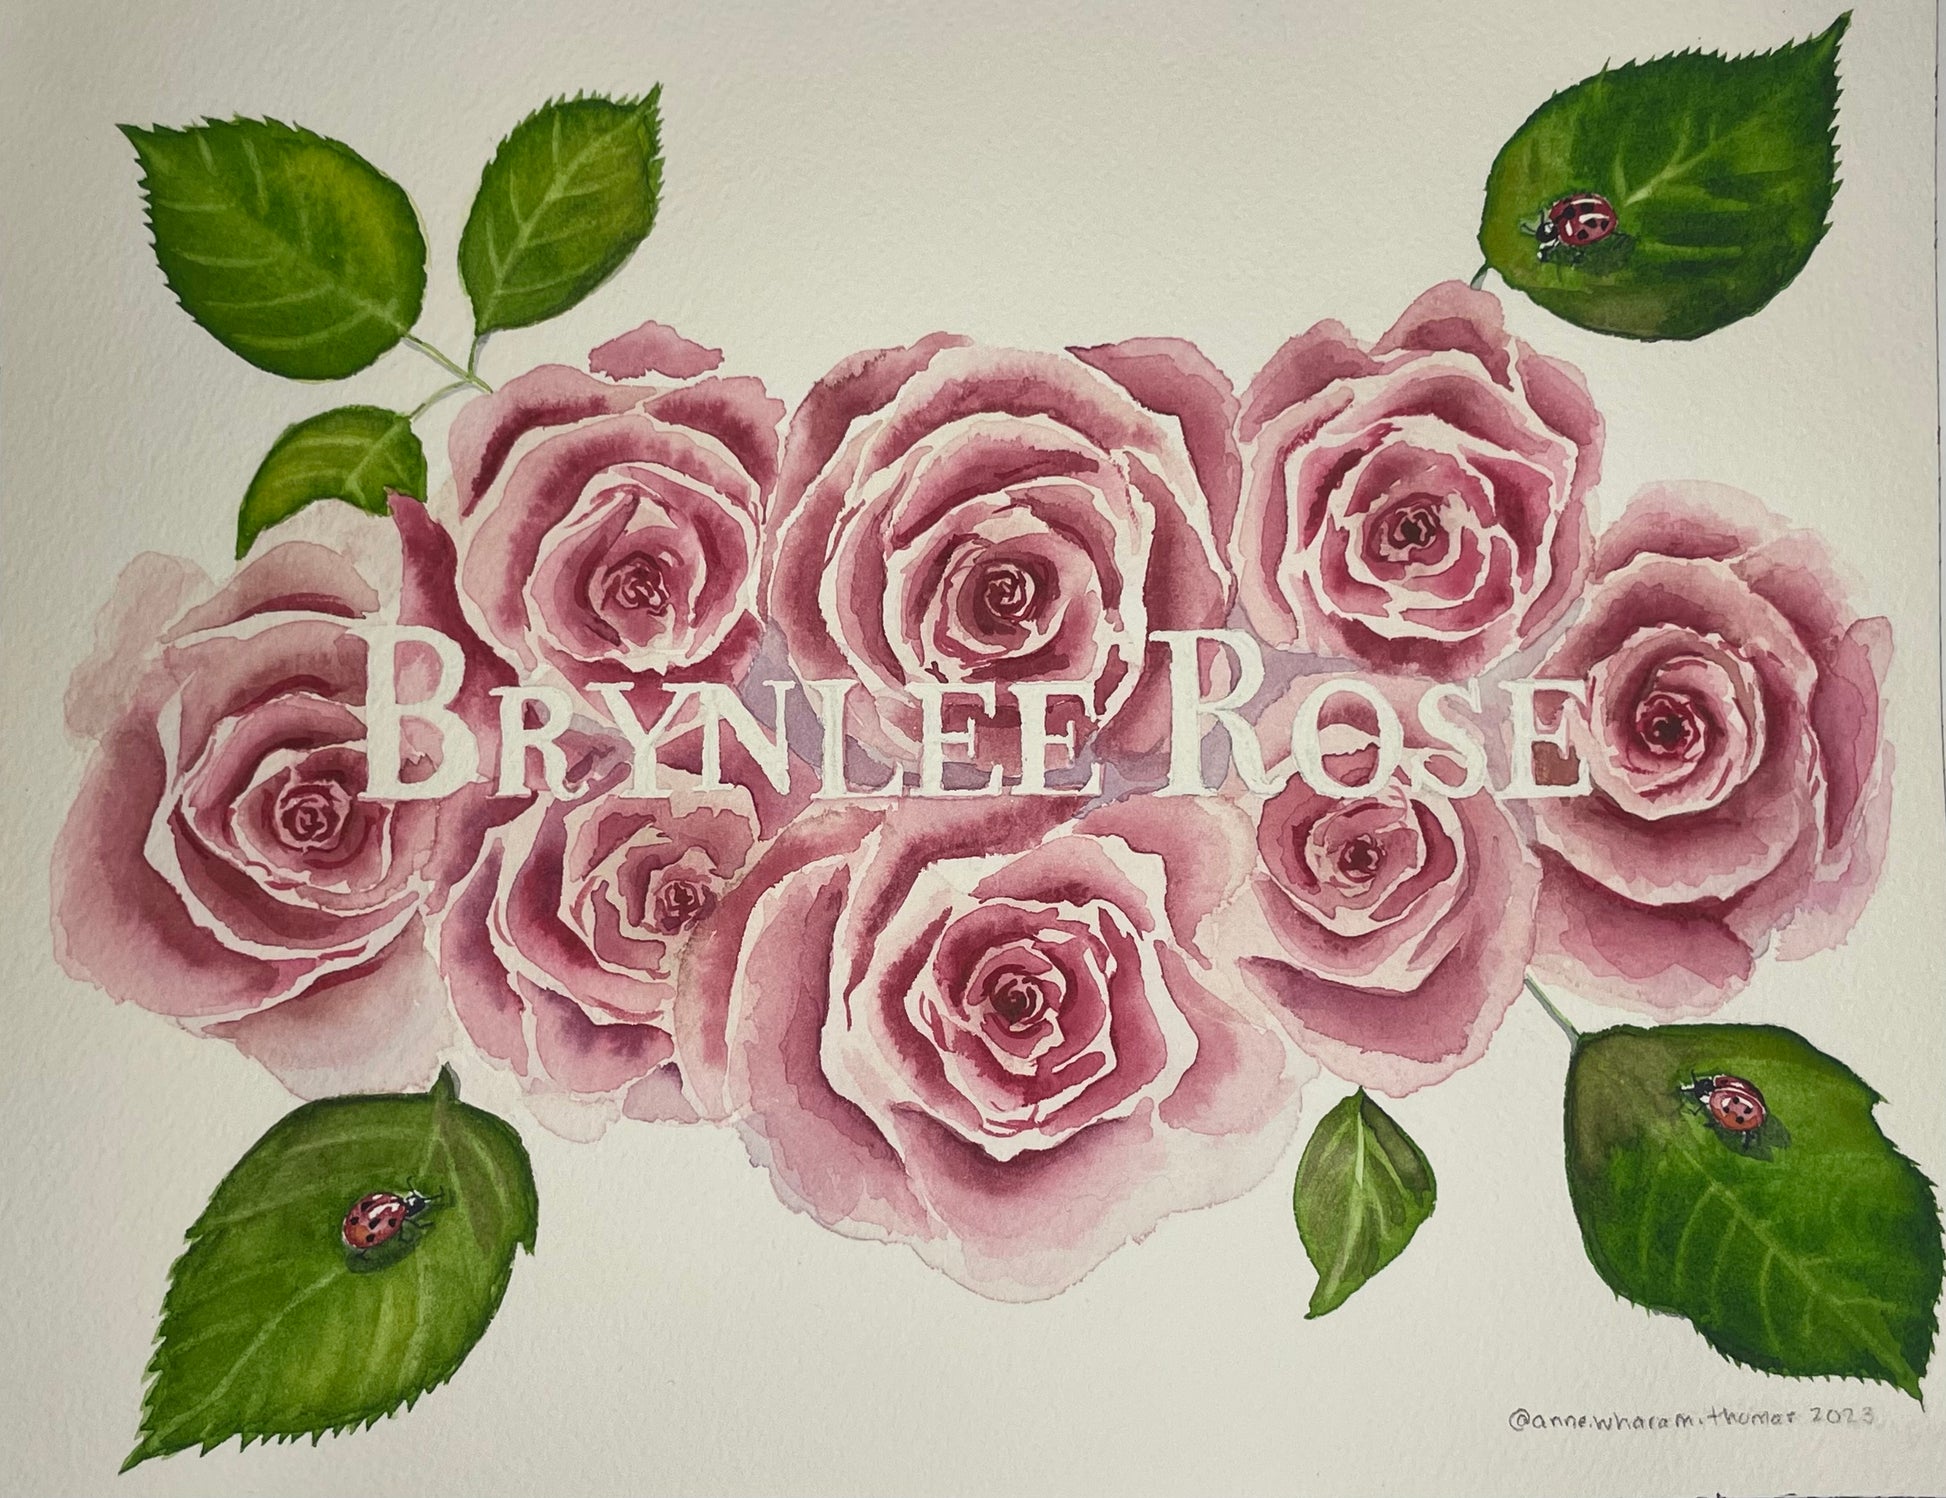 The name Brynlee Rose appears amidst a background of roses, foliage and three ladybugs.  Nursery art.